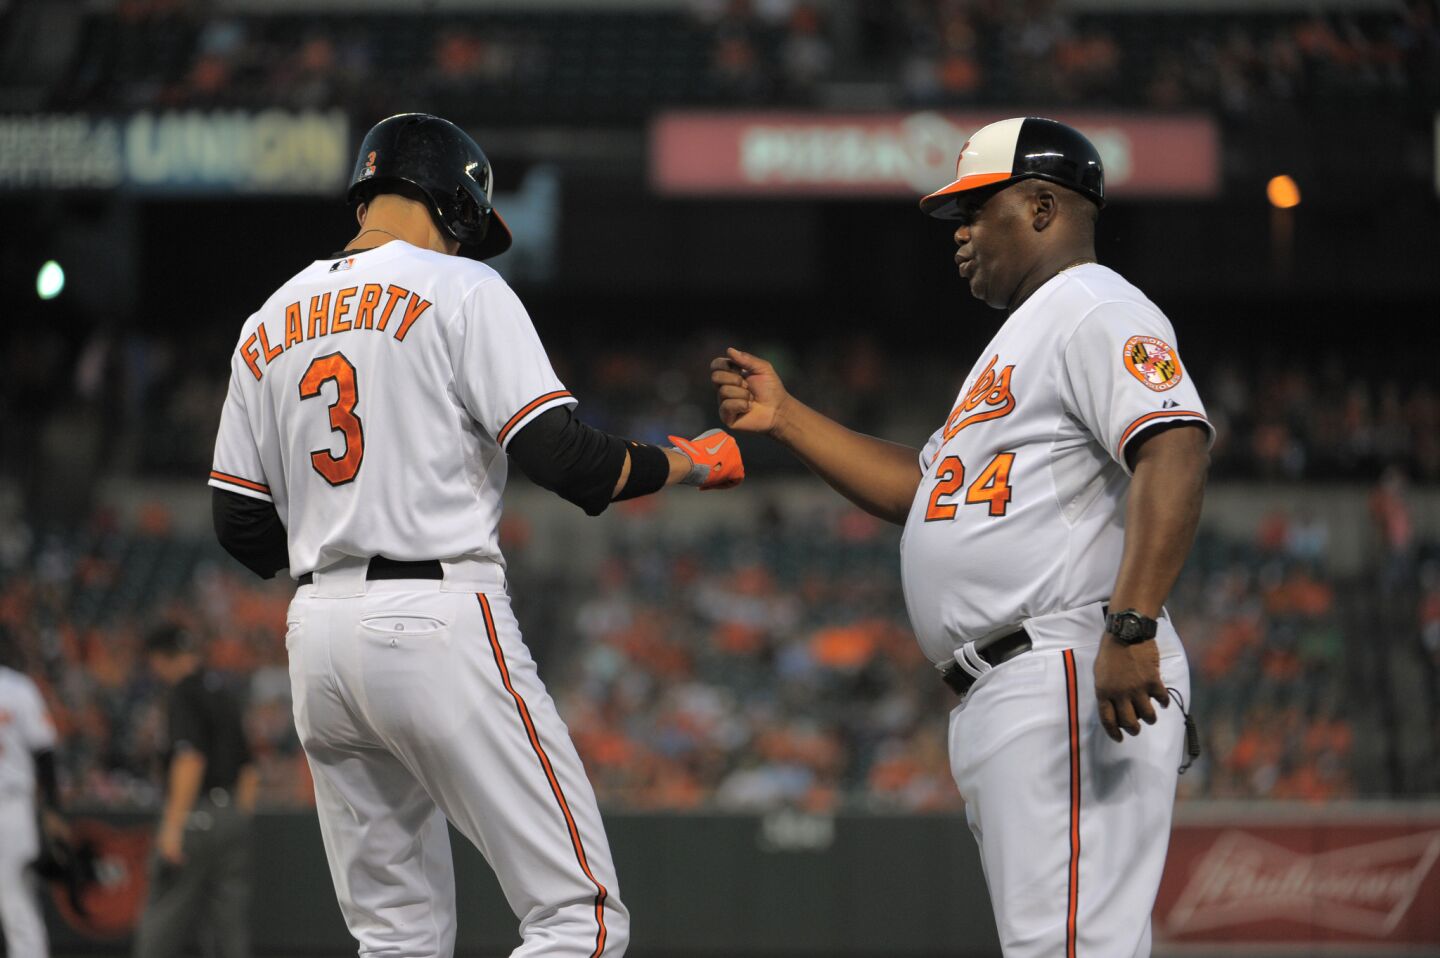 Baltimore Orioles players including Ryan Flaherty (3), Manny Machado (13),  and Steve Pearce (28) celebrate the